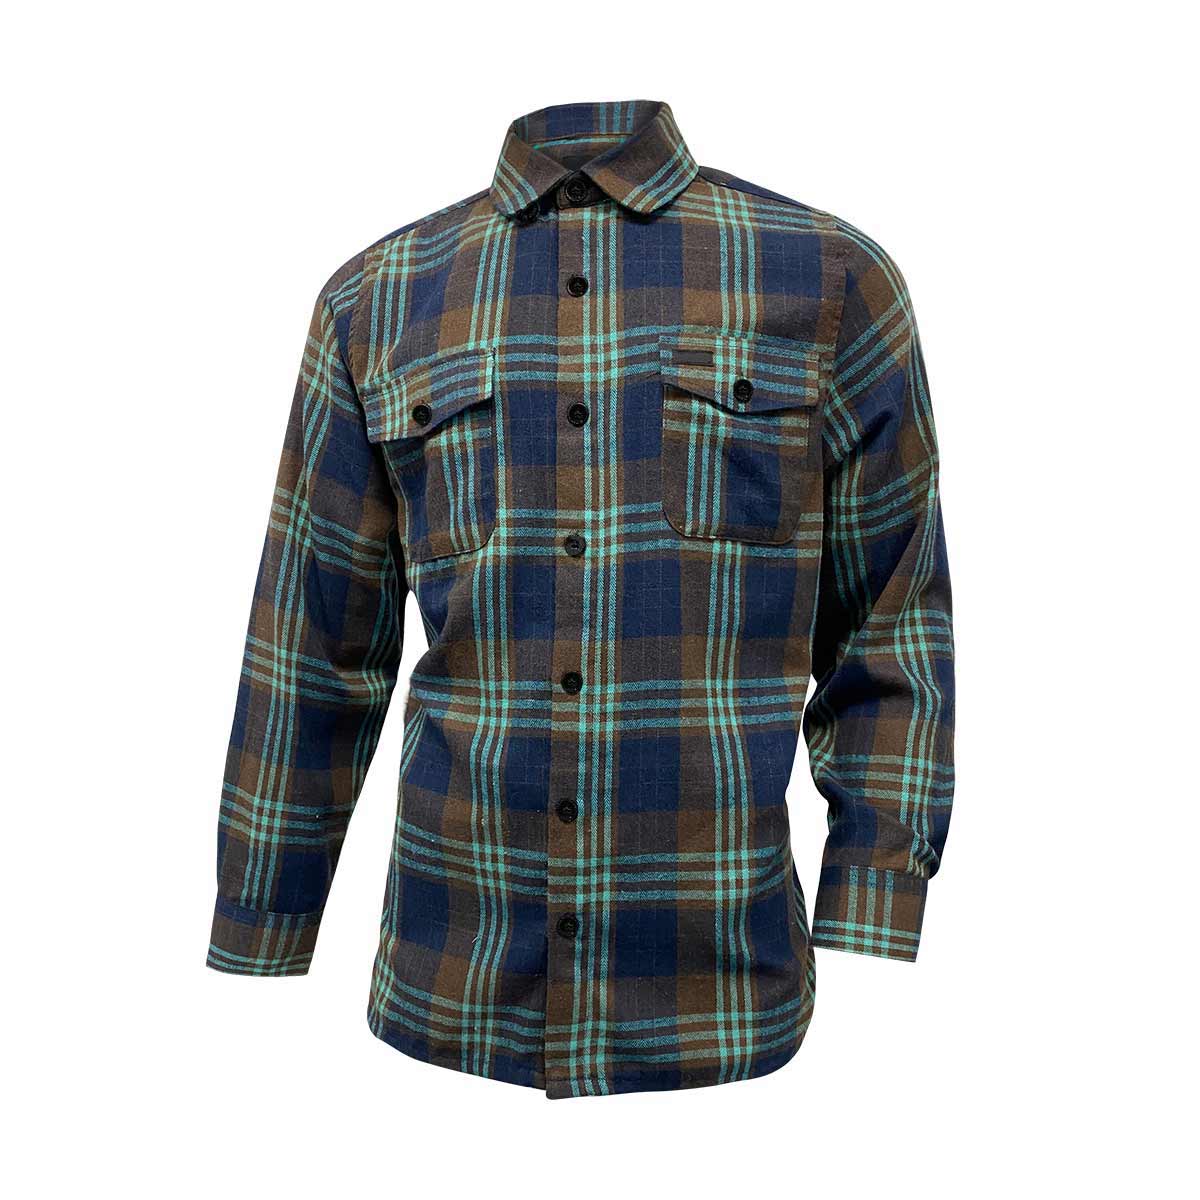 TianYun Men’s Casual Button Down Essentials Plaid Flannel Shirts with two pockets